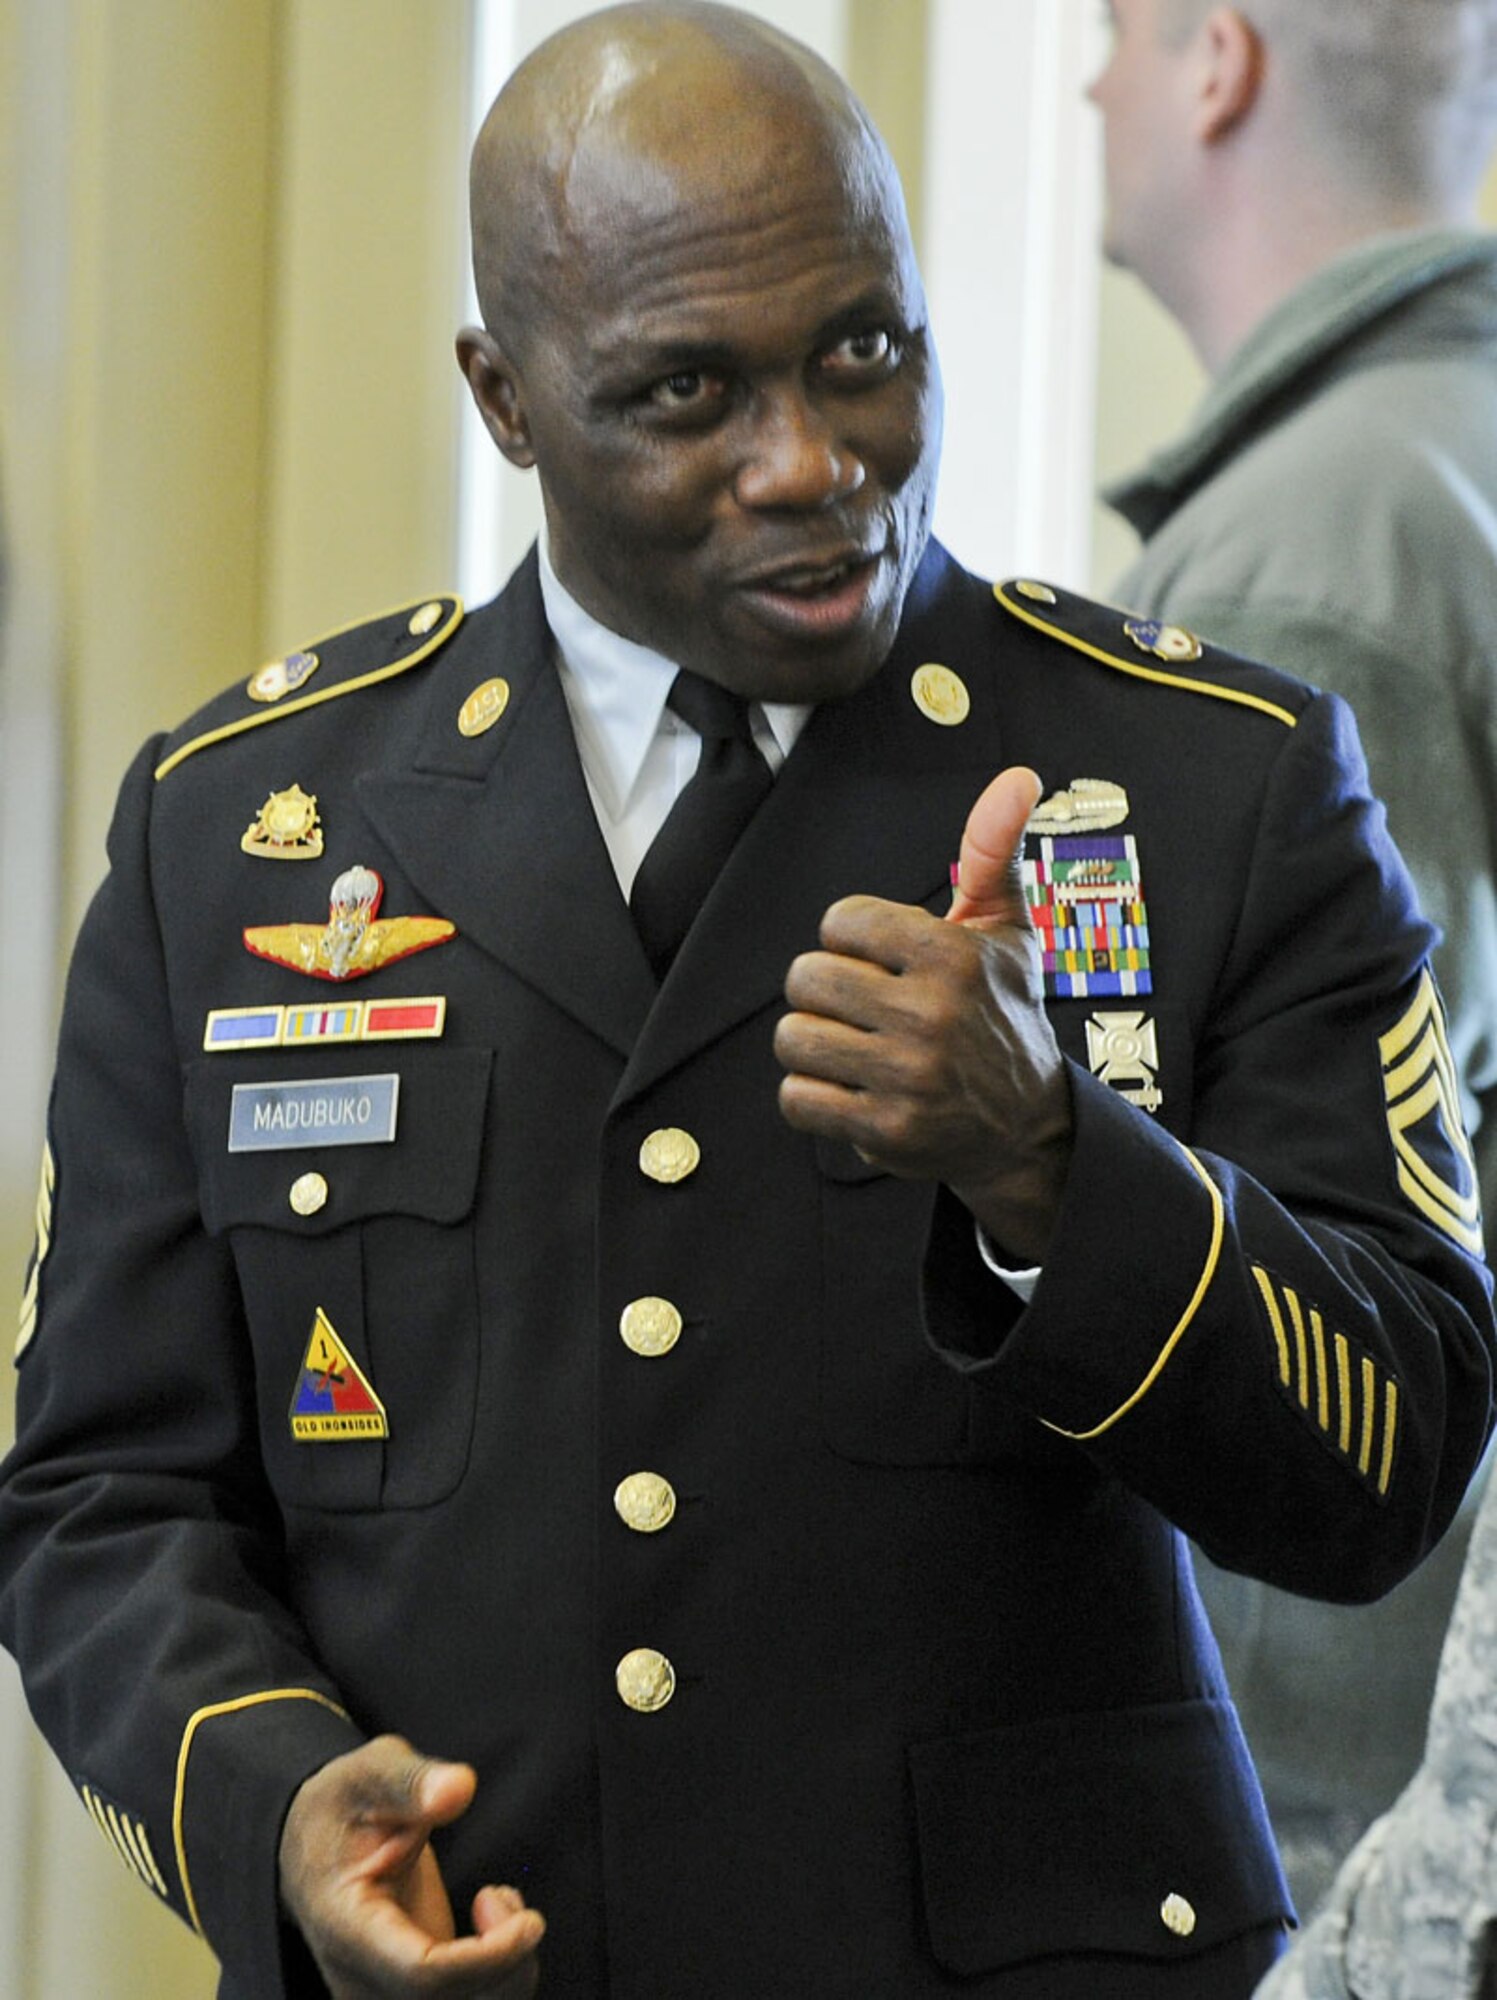 Warrior Transition Battalion Soldier Sgt. 1st Class Kelechi Madubuko of Washington D.C., a Purple Heart Medal recipient who was wounded in Iraq in 2003, gives a “thumbs up” to a fellow Soldier before the ribbon cutting ceremony celebrating official opening the Warrior Transition Battalion-Alaska on JBER Friday, with guest speaker Maj. Gen. Raymond Palumbo, commanding general United States Army Alaska and Alaska Gov. Sean Parnell among other distinguished dignitaries.  (U.S. Air Force photo/Justin Connaher)